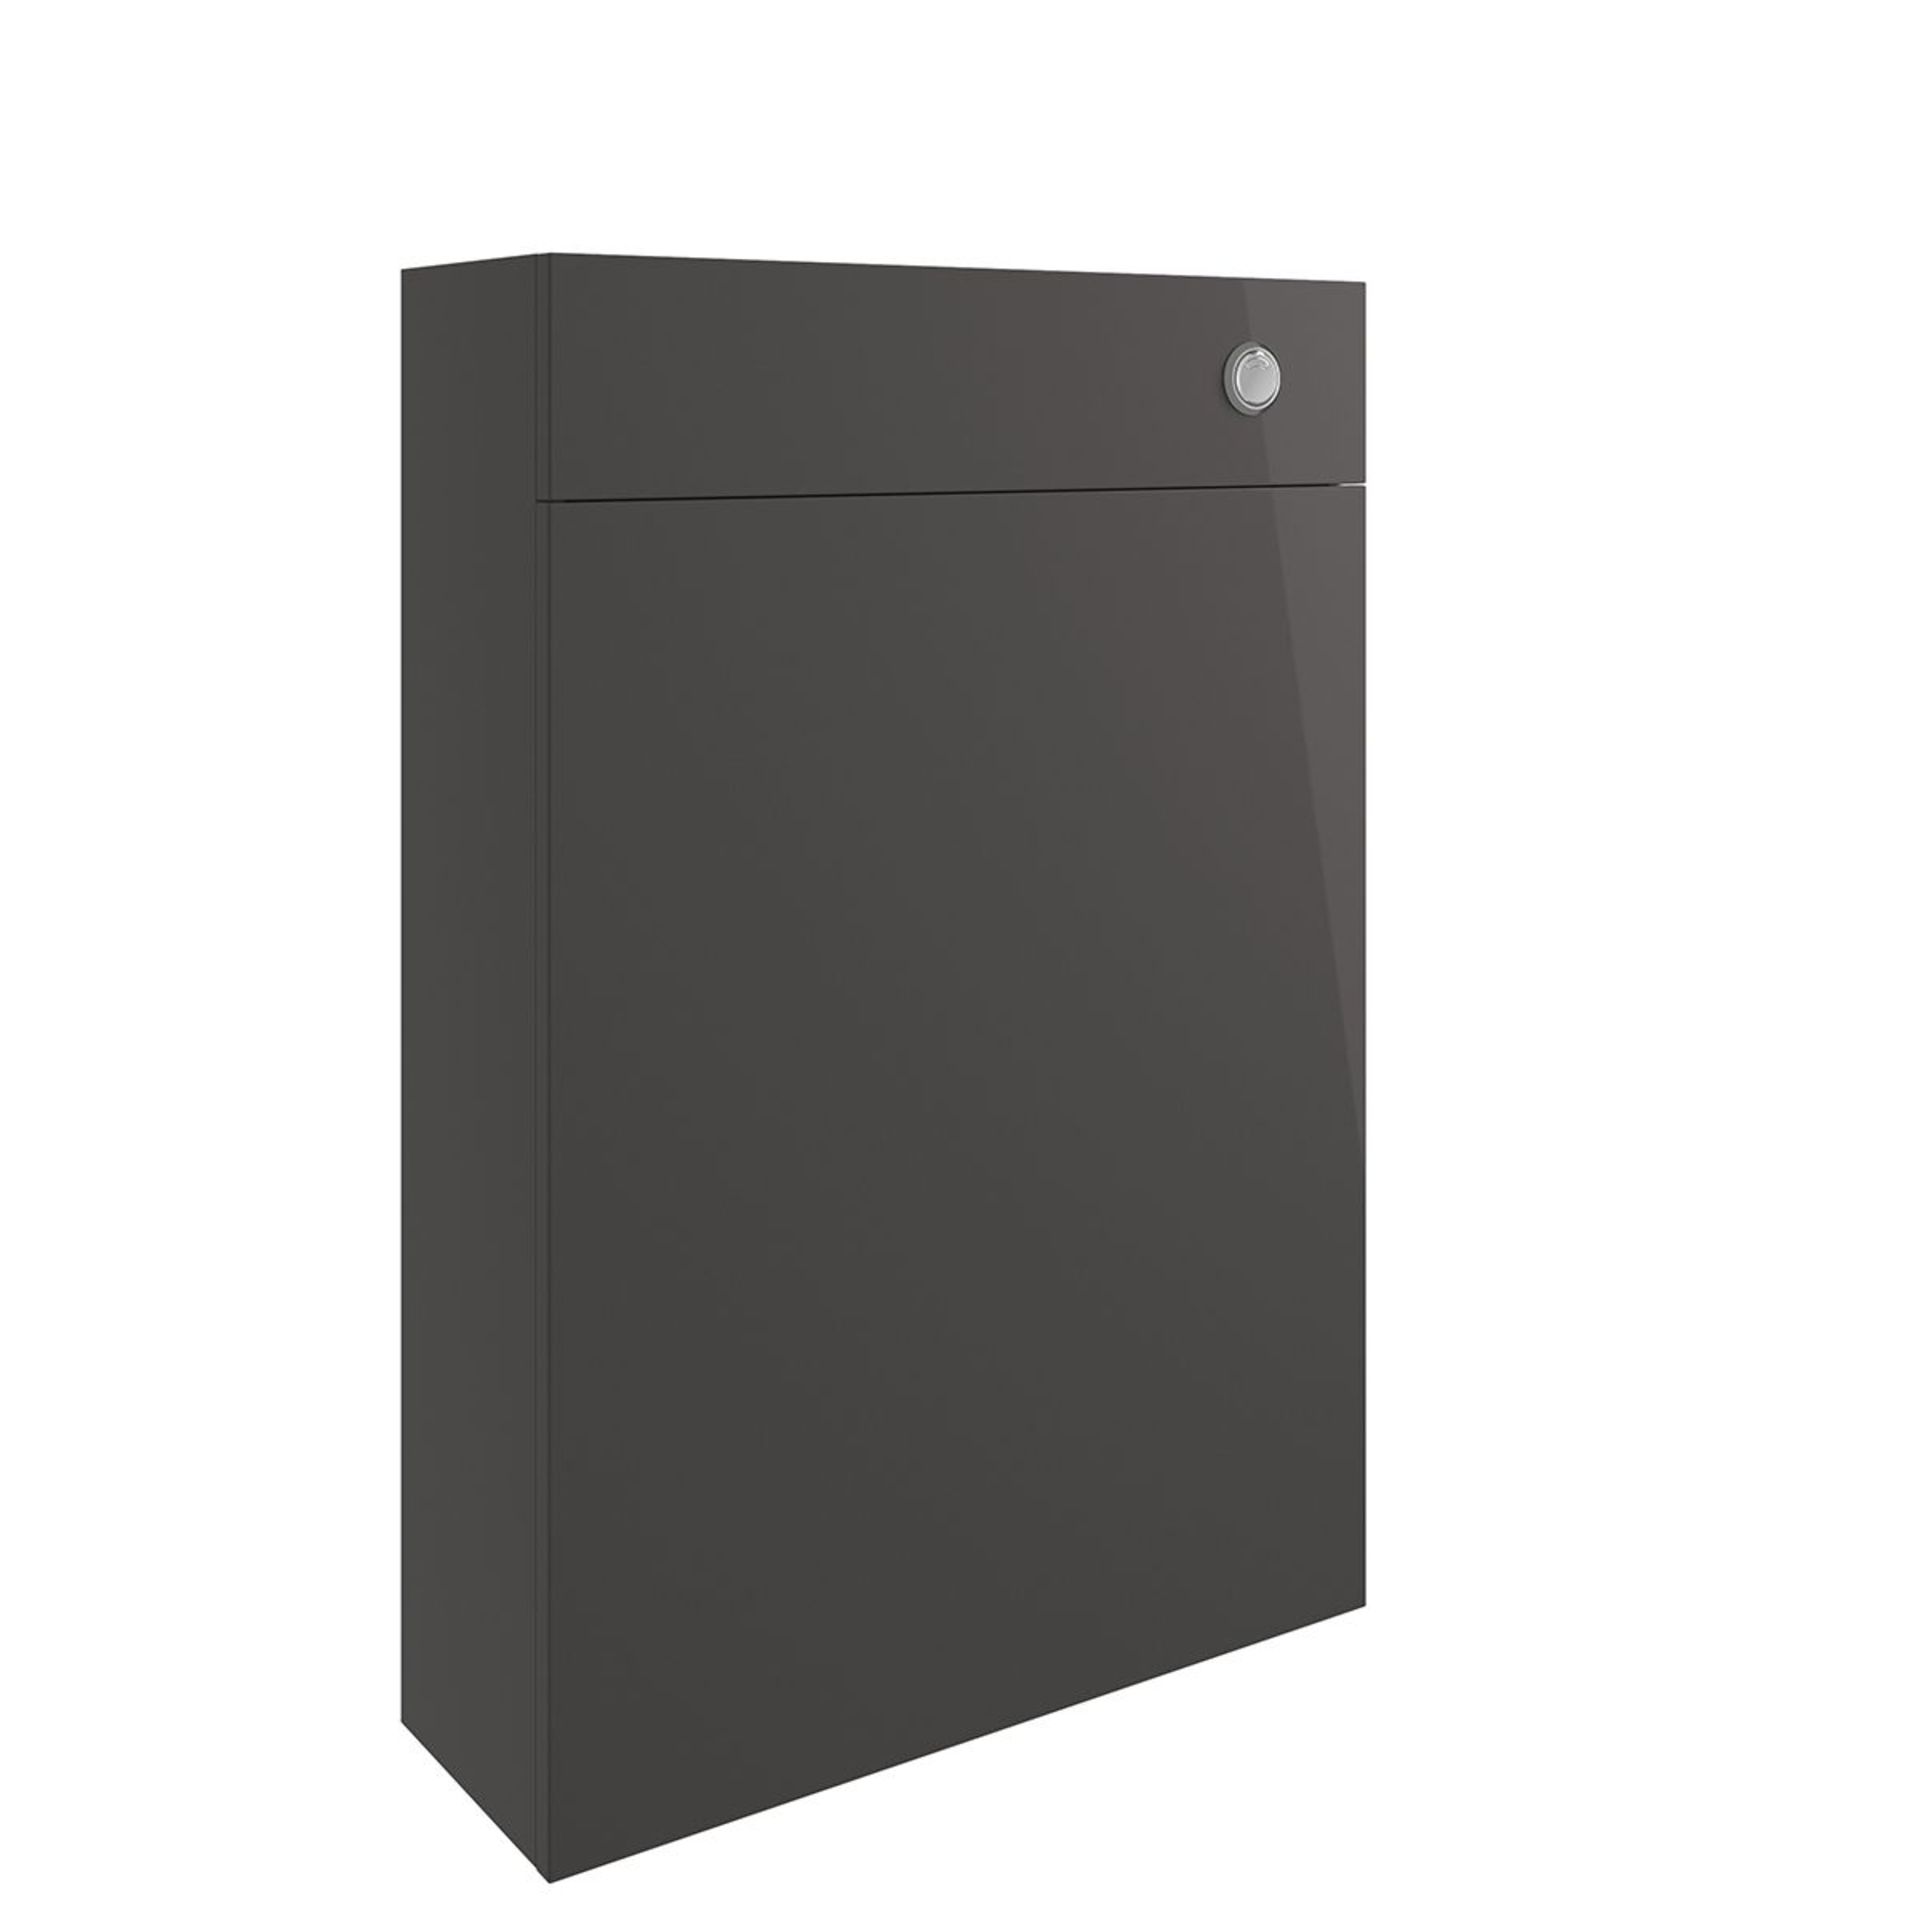 New (Y105) Onyx Grey Gloss Slim WC Unit 600mm. RRP £355.00. Durable 18mm Cabinet, Sides And B... - Image 2 of 2